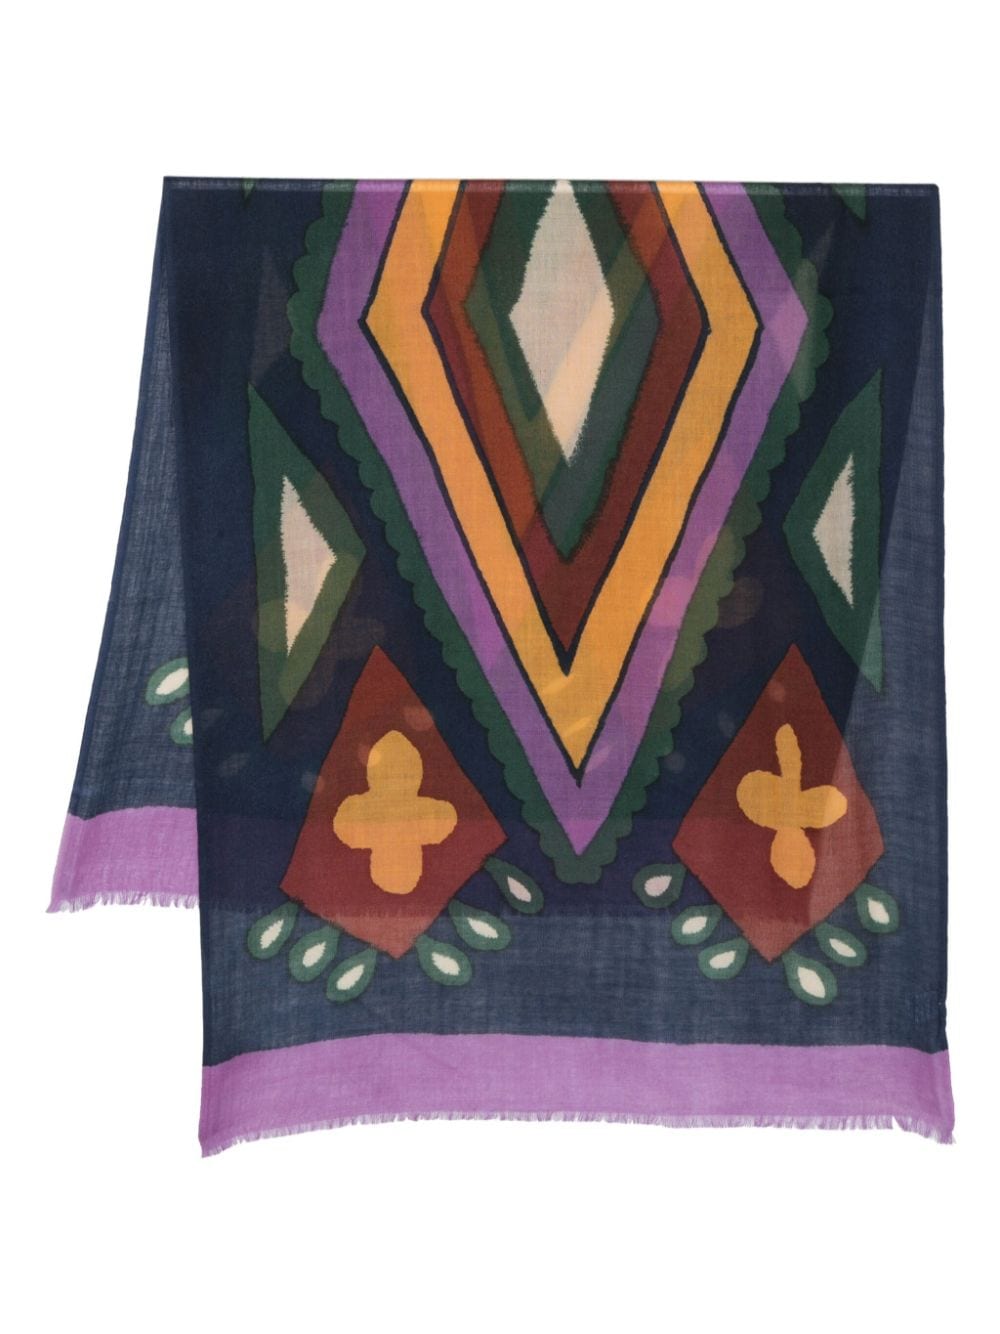 graphic-print wool scarf